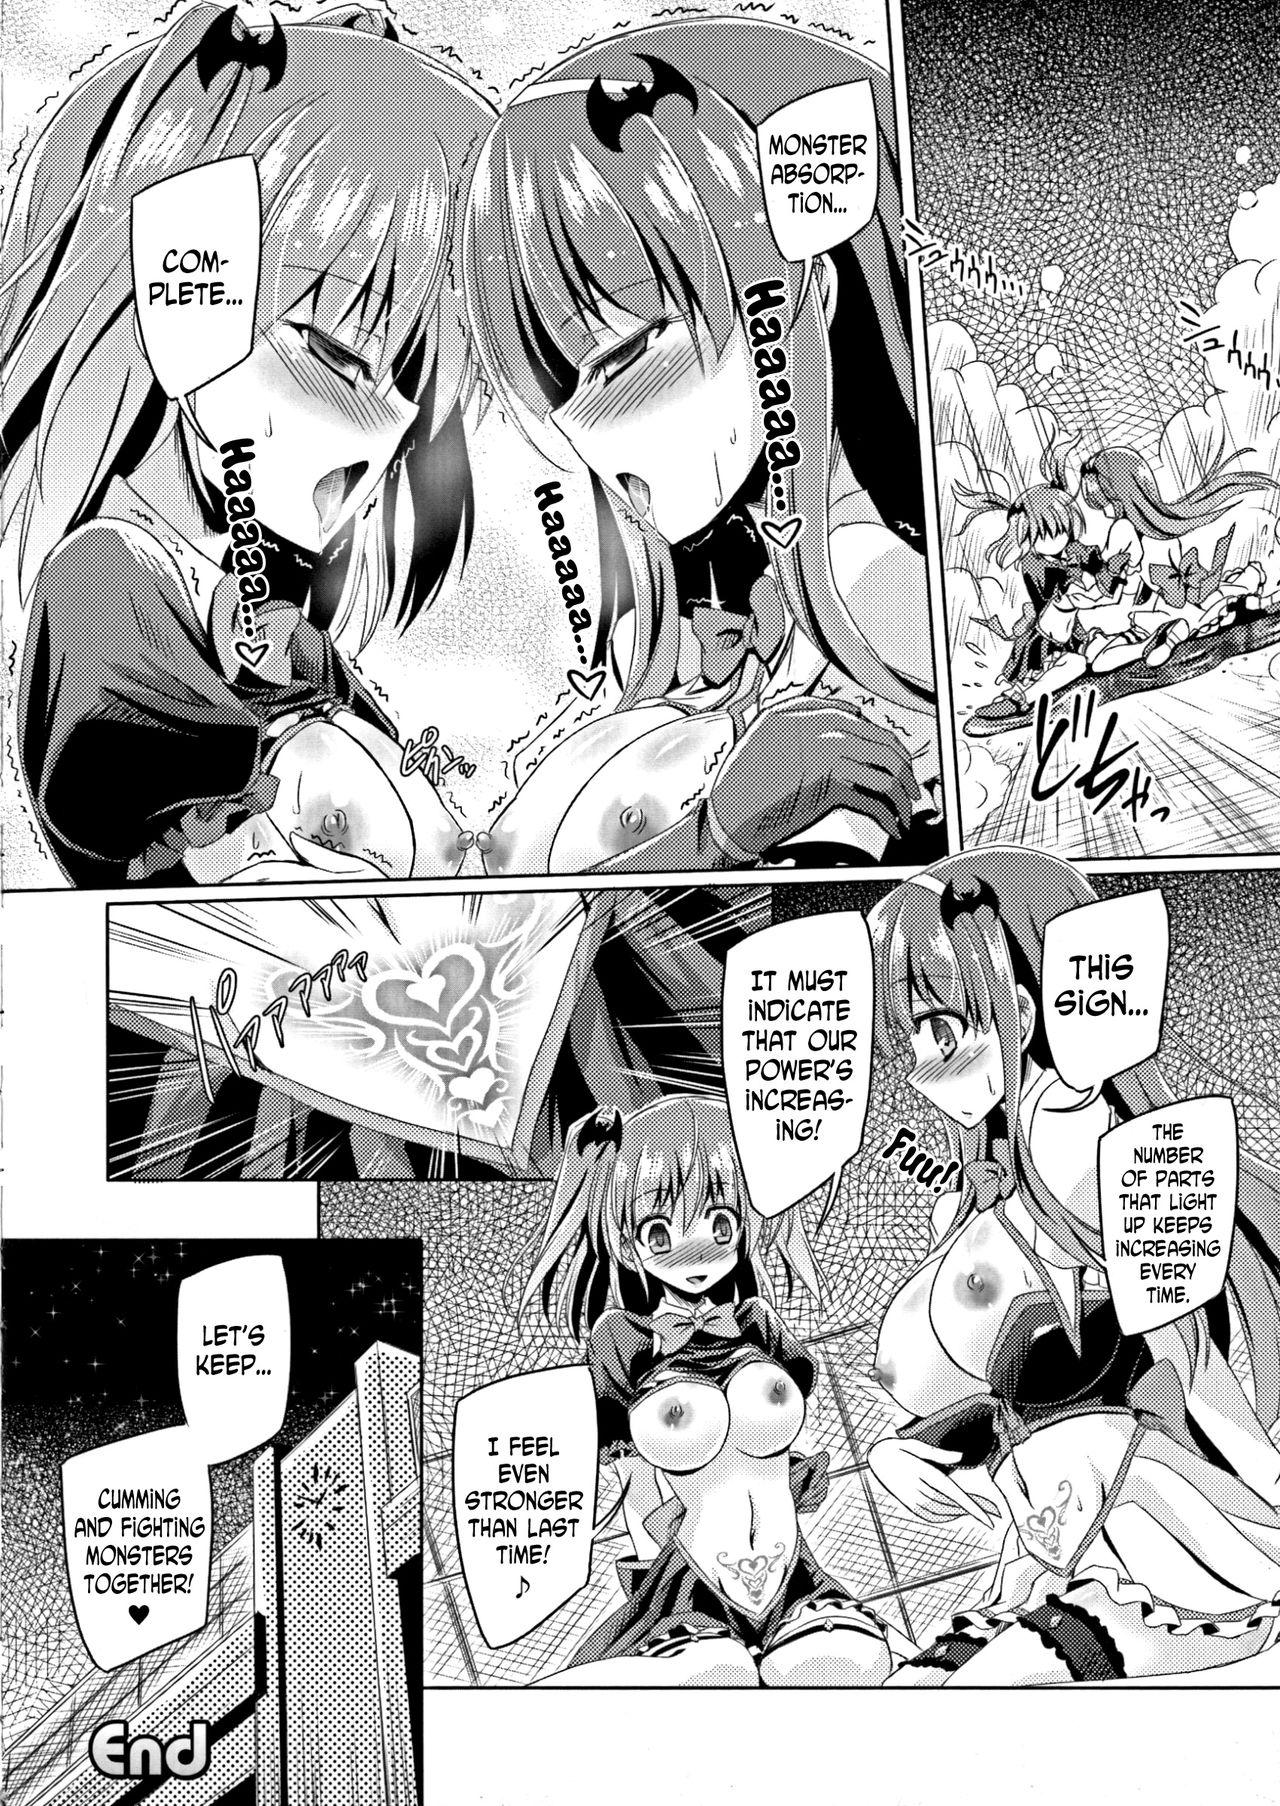 Creampies Kyuuma Tenshi Succubus Kiss | Monster Absorption Angel Succubus Kiss Sologirl - Page 16